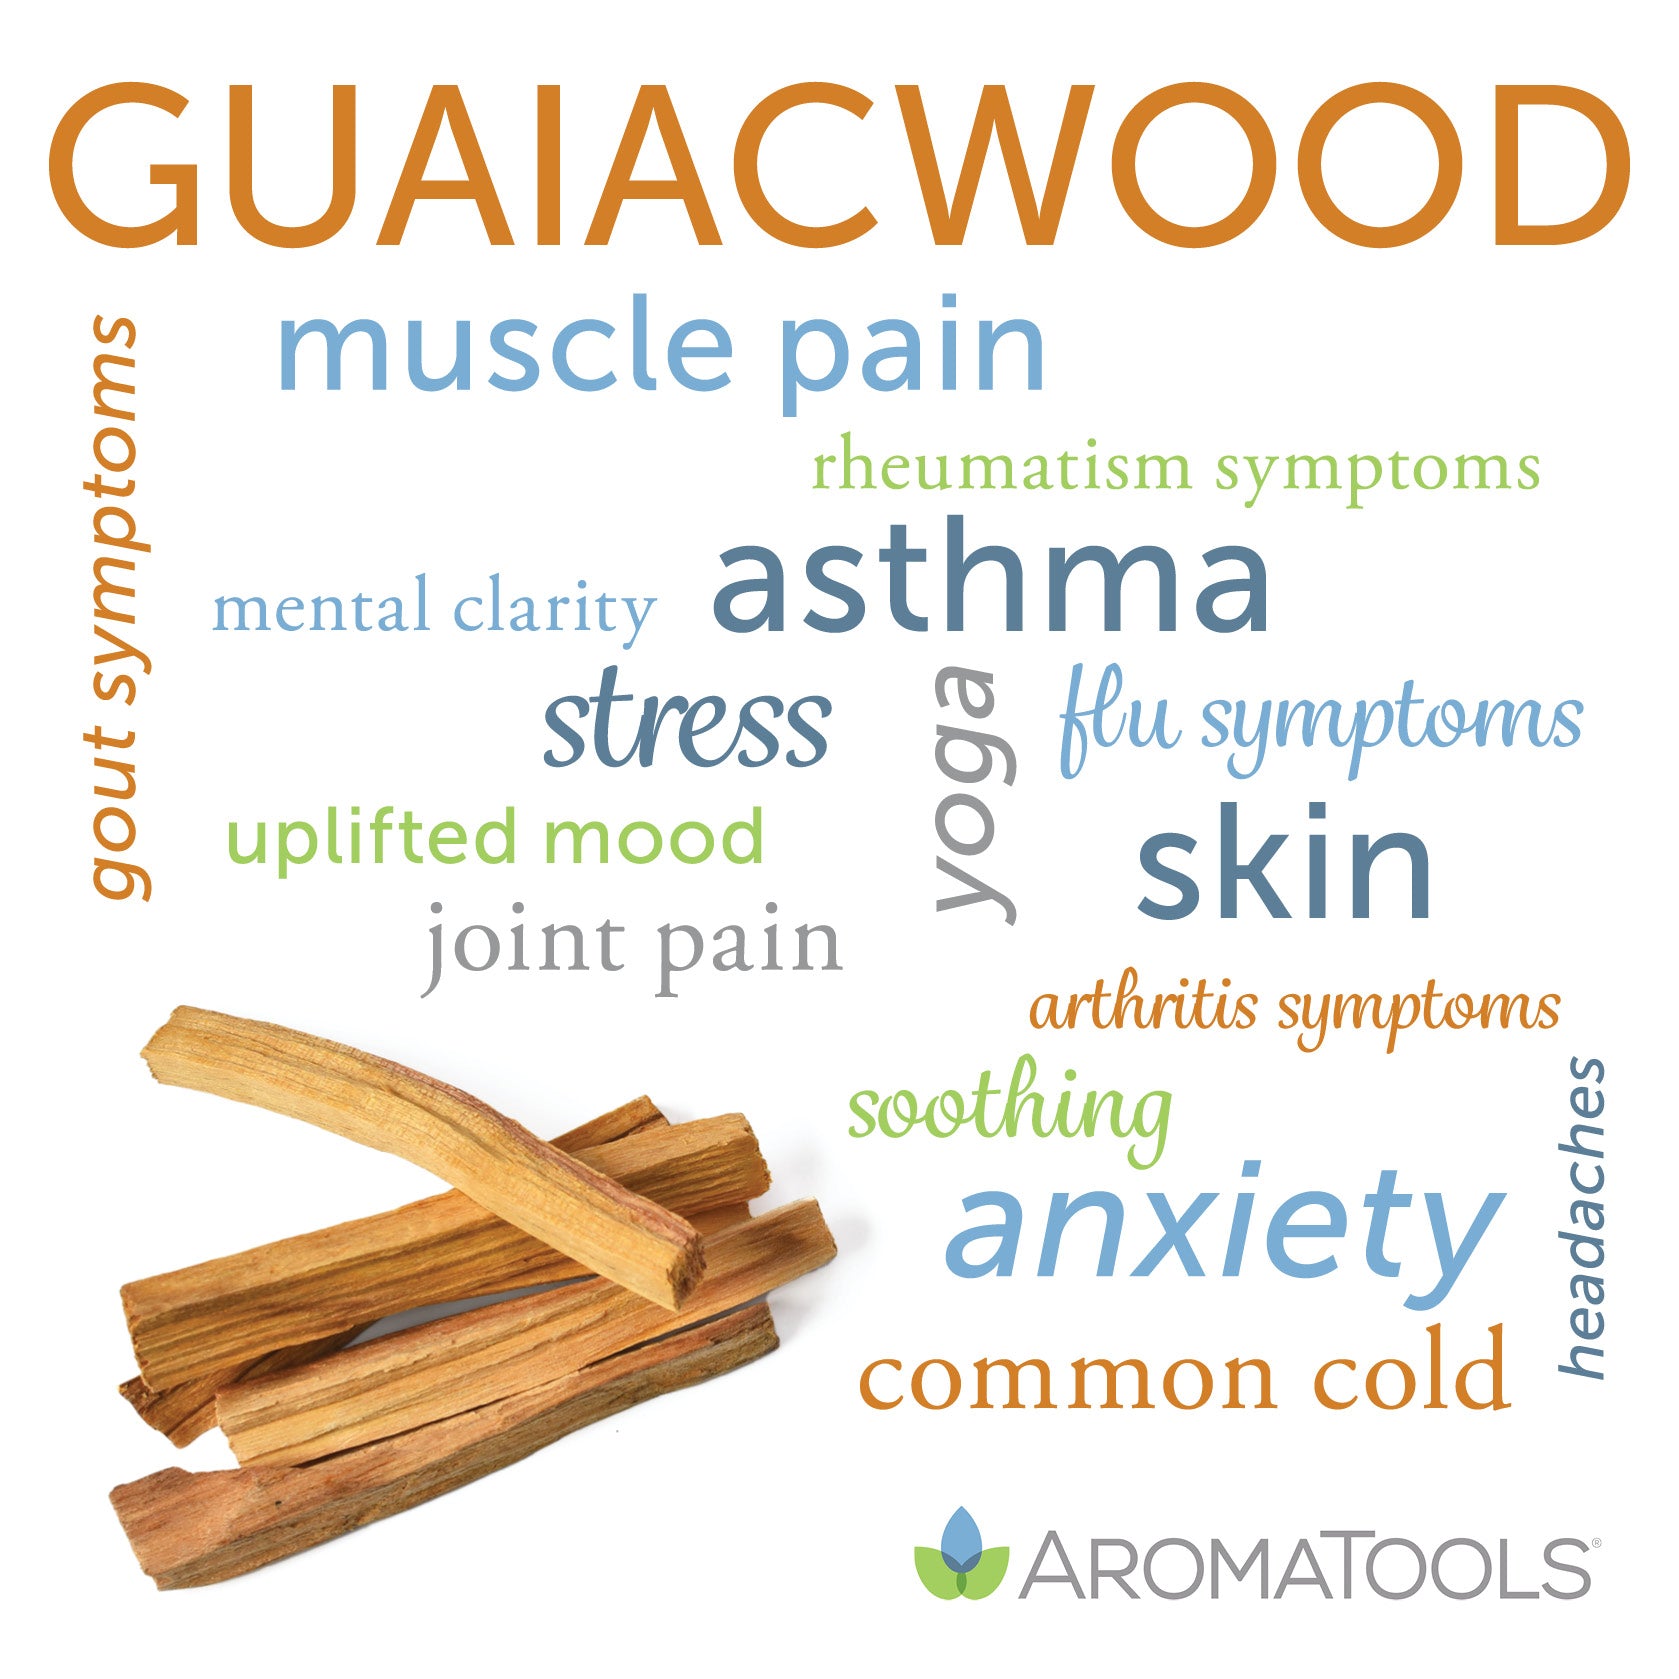 Learn more about guaiacwood essential oil: properties, common uses, benefits, safety data, application, and recipes.